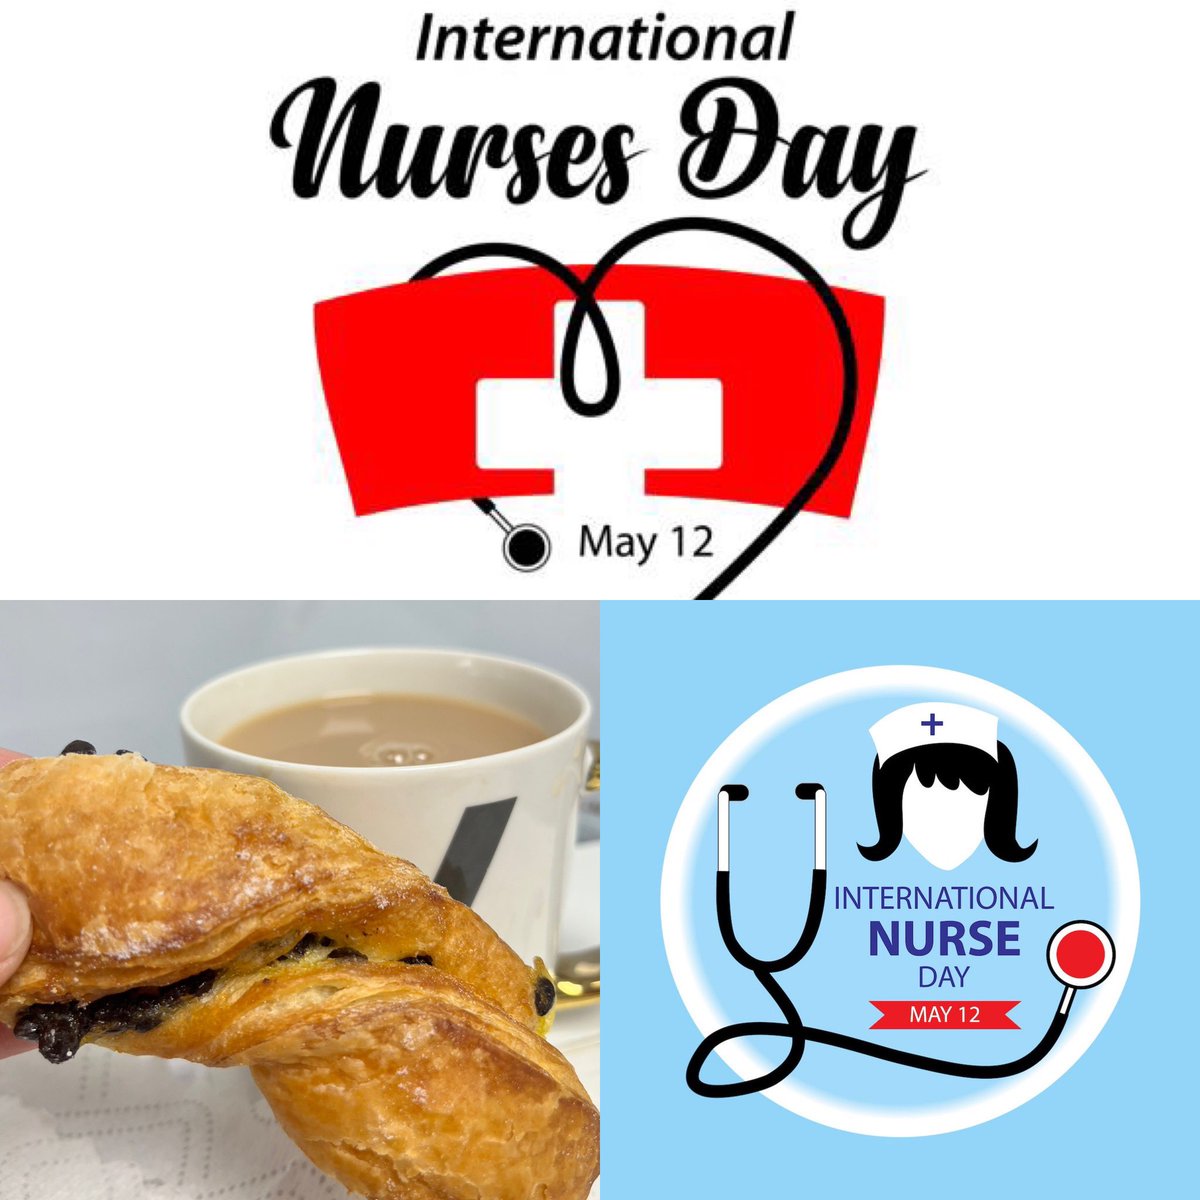 Happy International Nurses Day! Thank you for our treats 🥐@JanetCordwell @Kkgoods1 @tandgicft #InternationalNursesDay #InternationalNursesDay2023